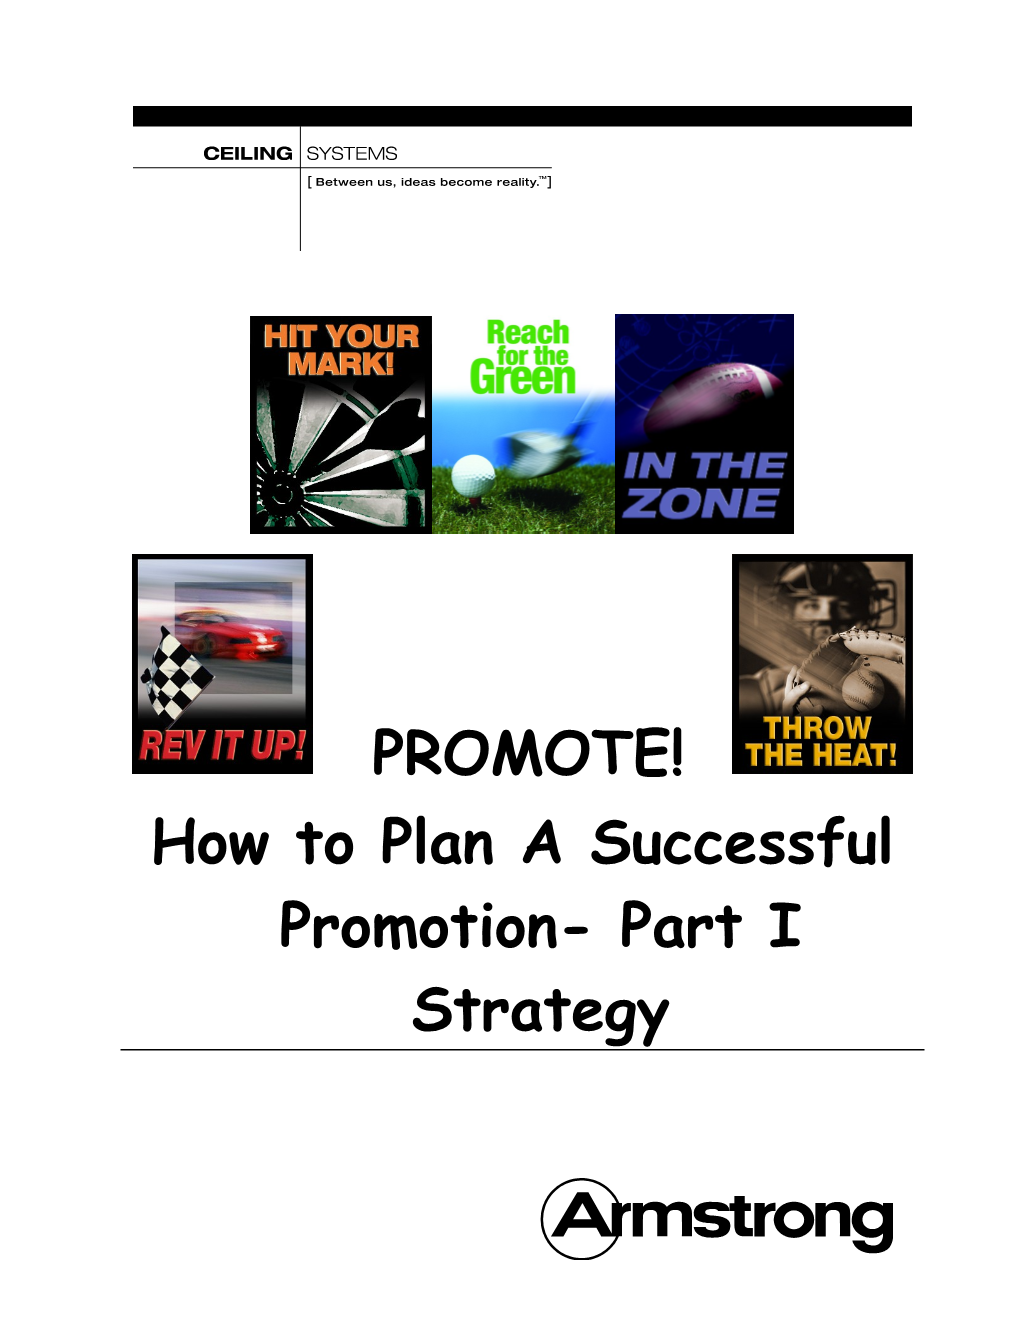 How to Plan a Successful Promotion- Part I Strategy